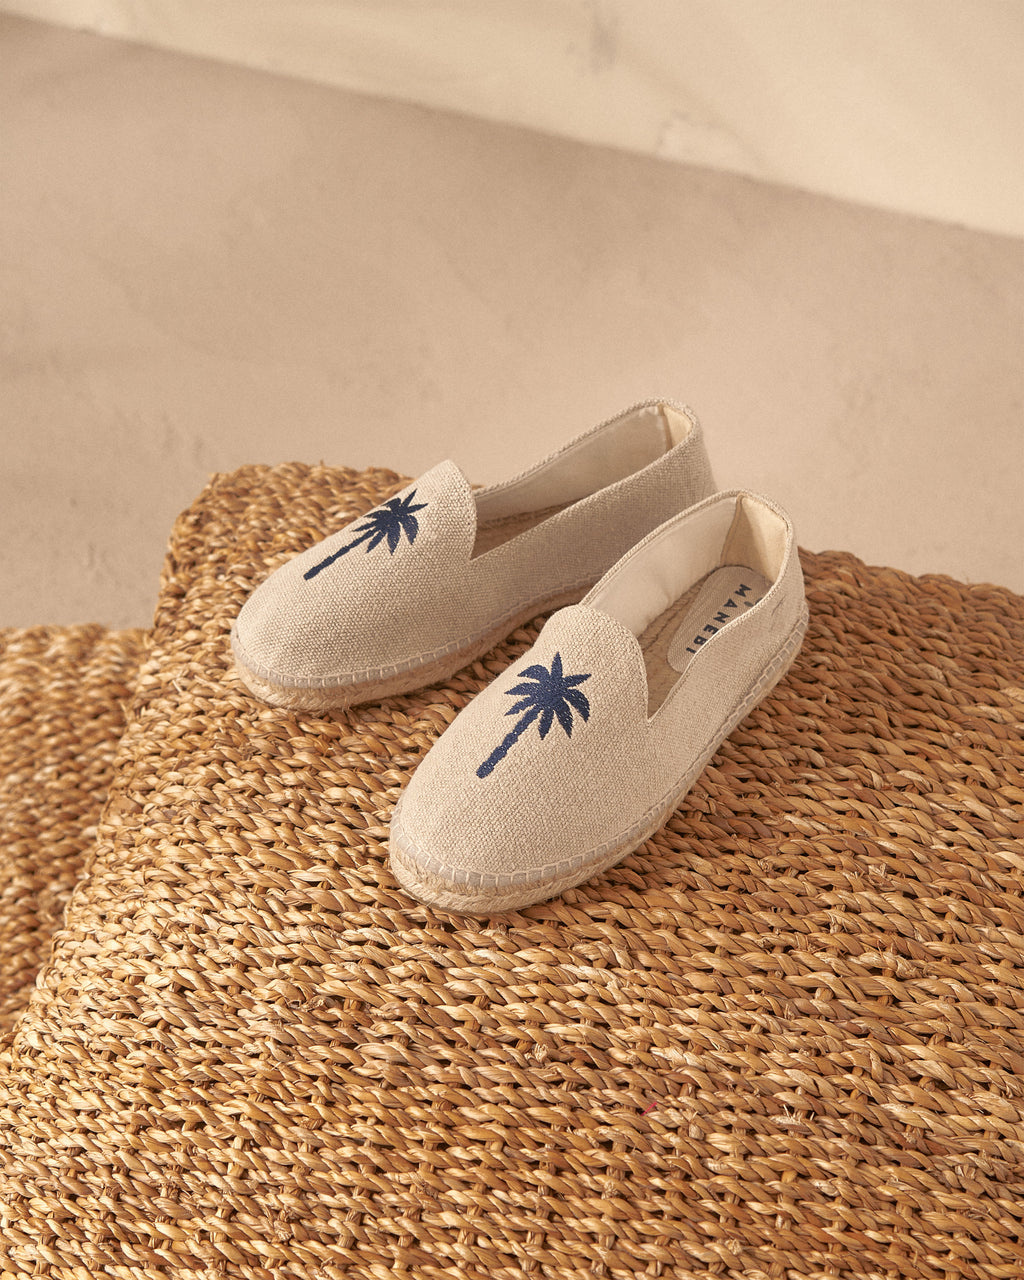 Organic Hemp With Embroidery Flat Espadrilles - Natural & Navy Palm